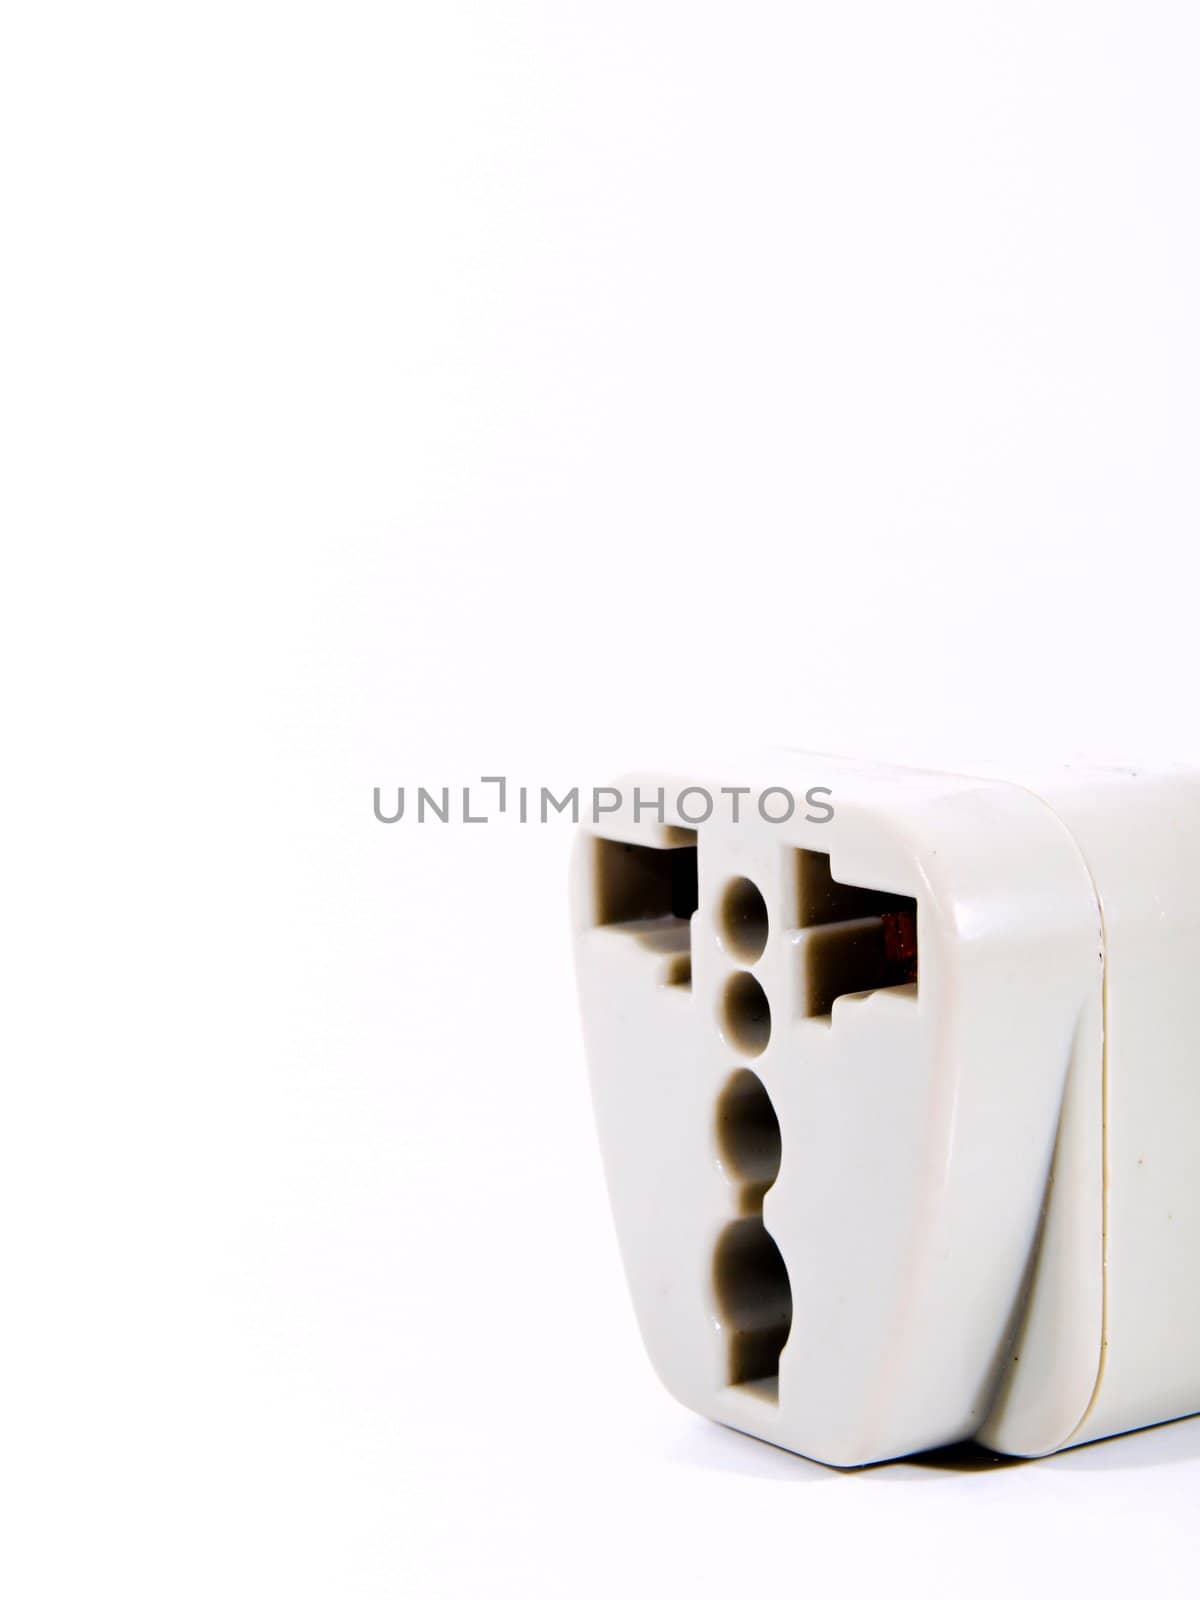 Universal Power Outlet Adapter by cocoyjurado9000